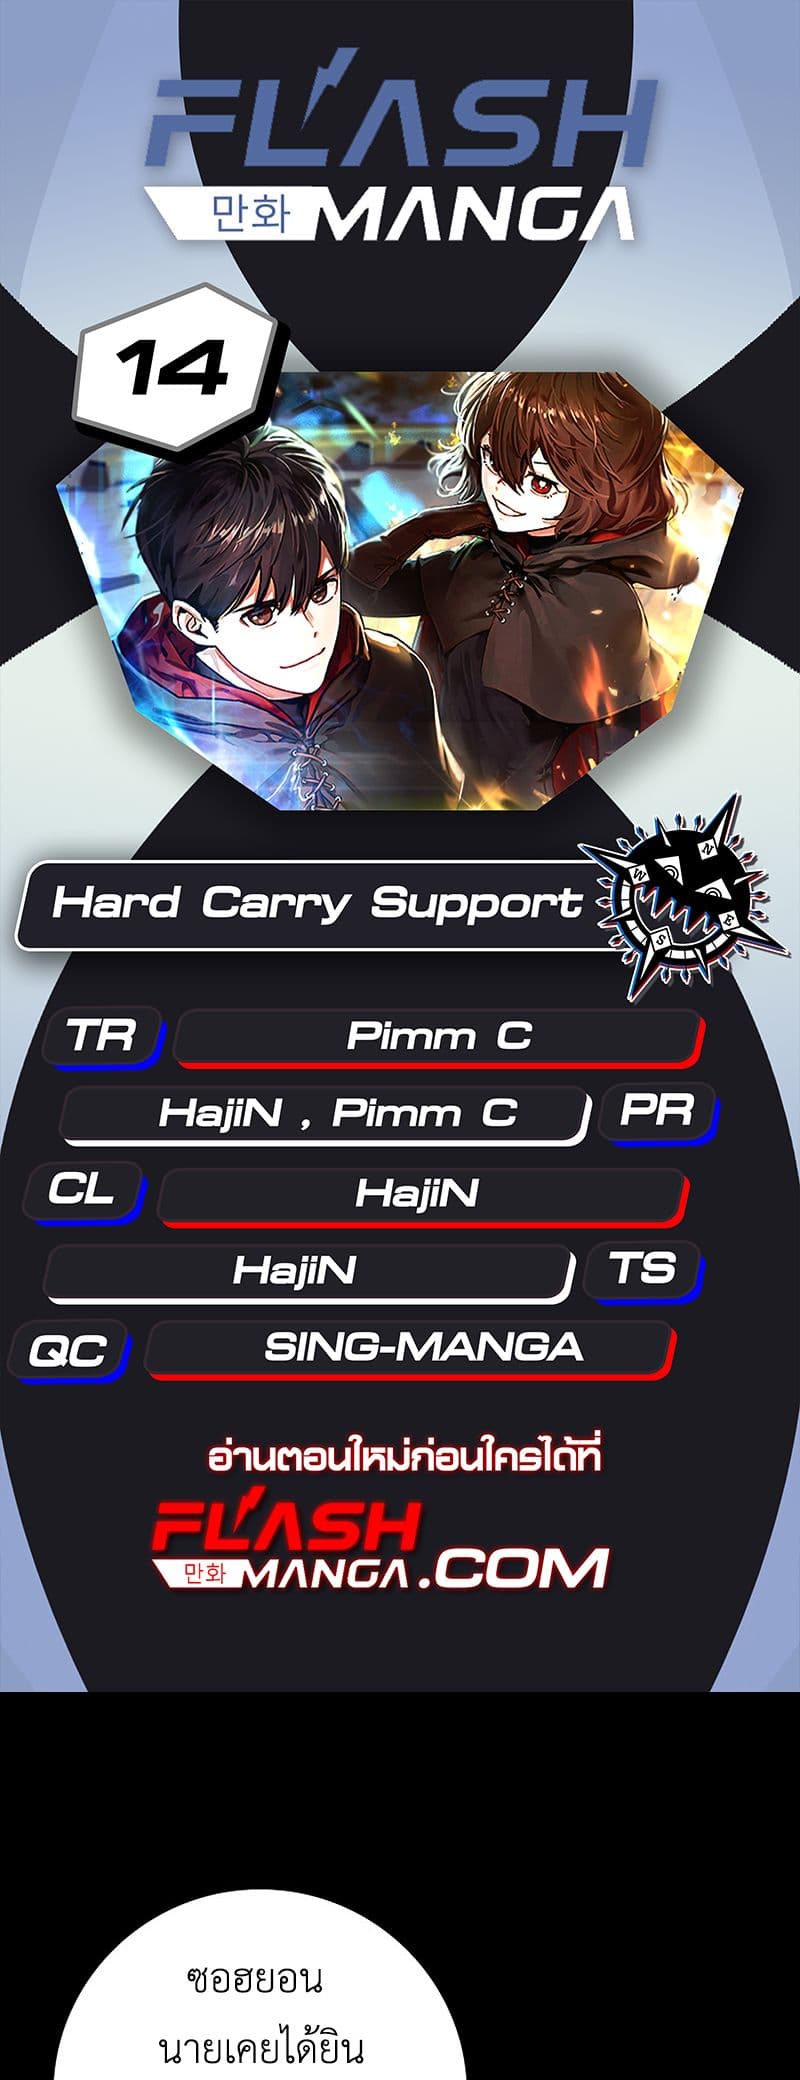 Hard Carry Supporter 14-14